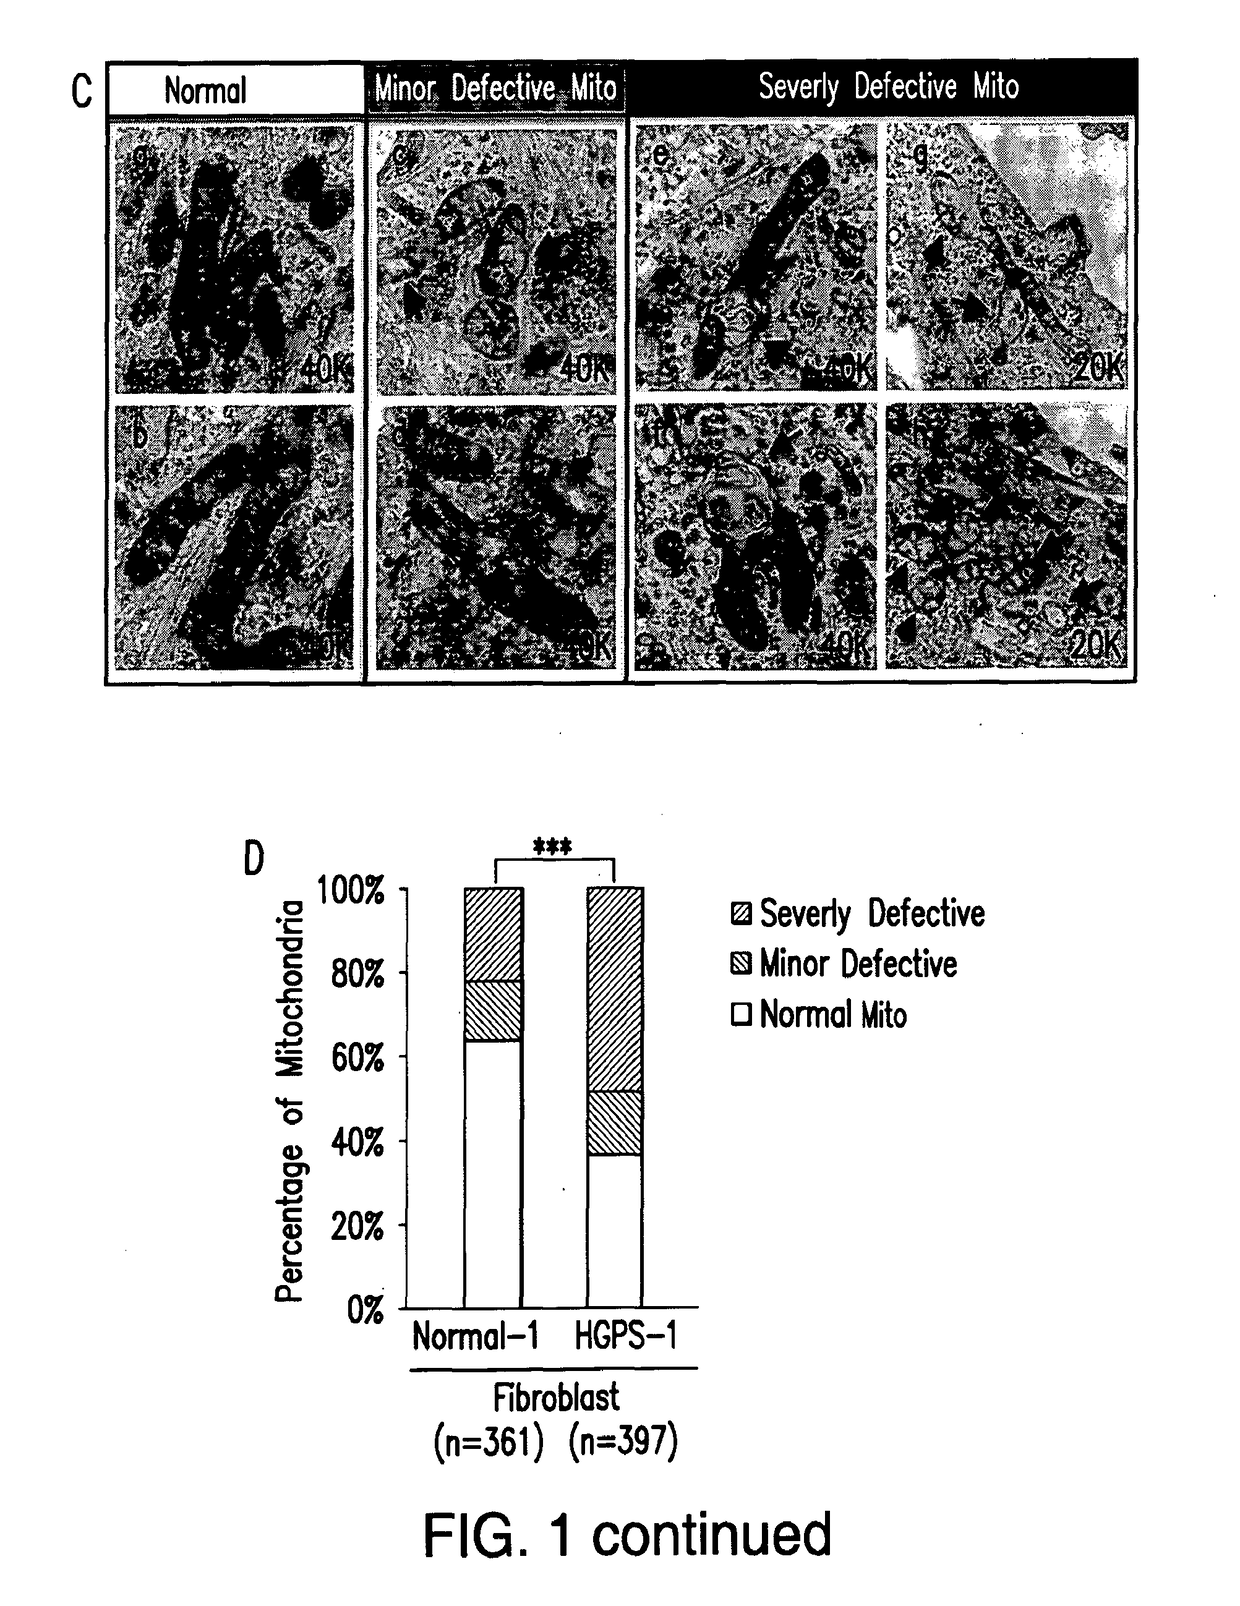 Methods of Treating Age-Related Symptoms in Mammals and Compositions therefor